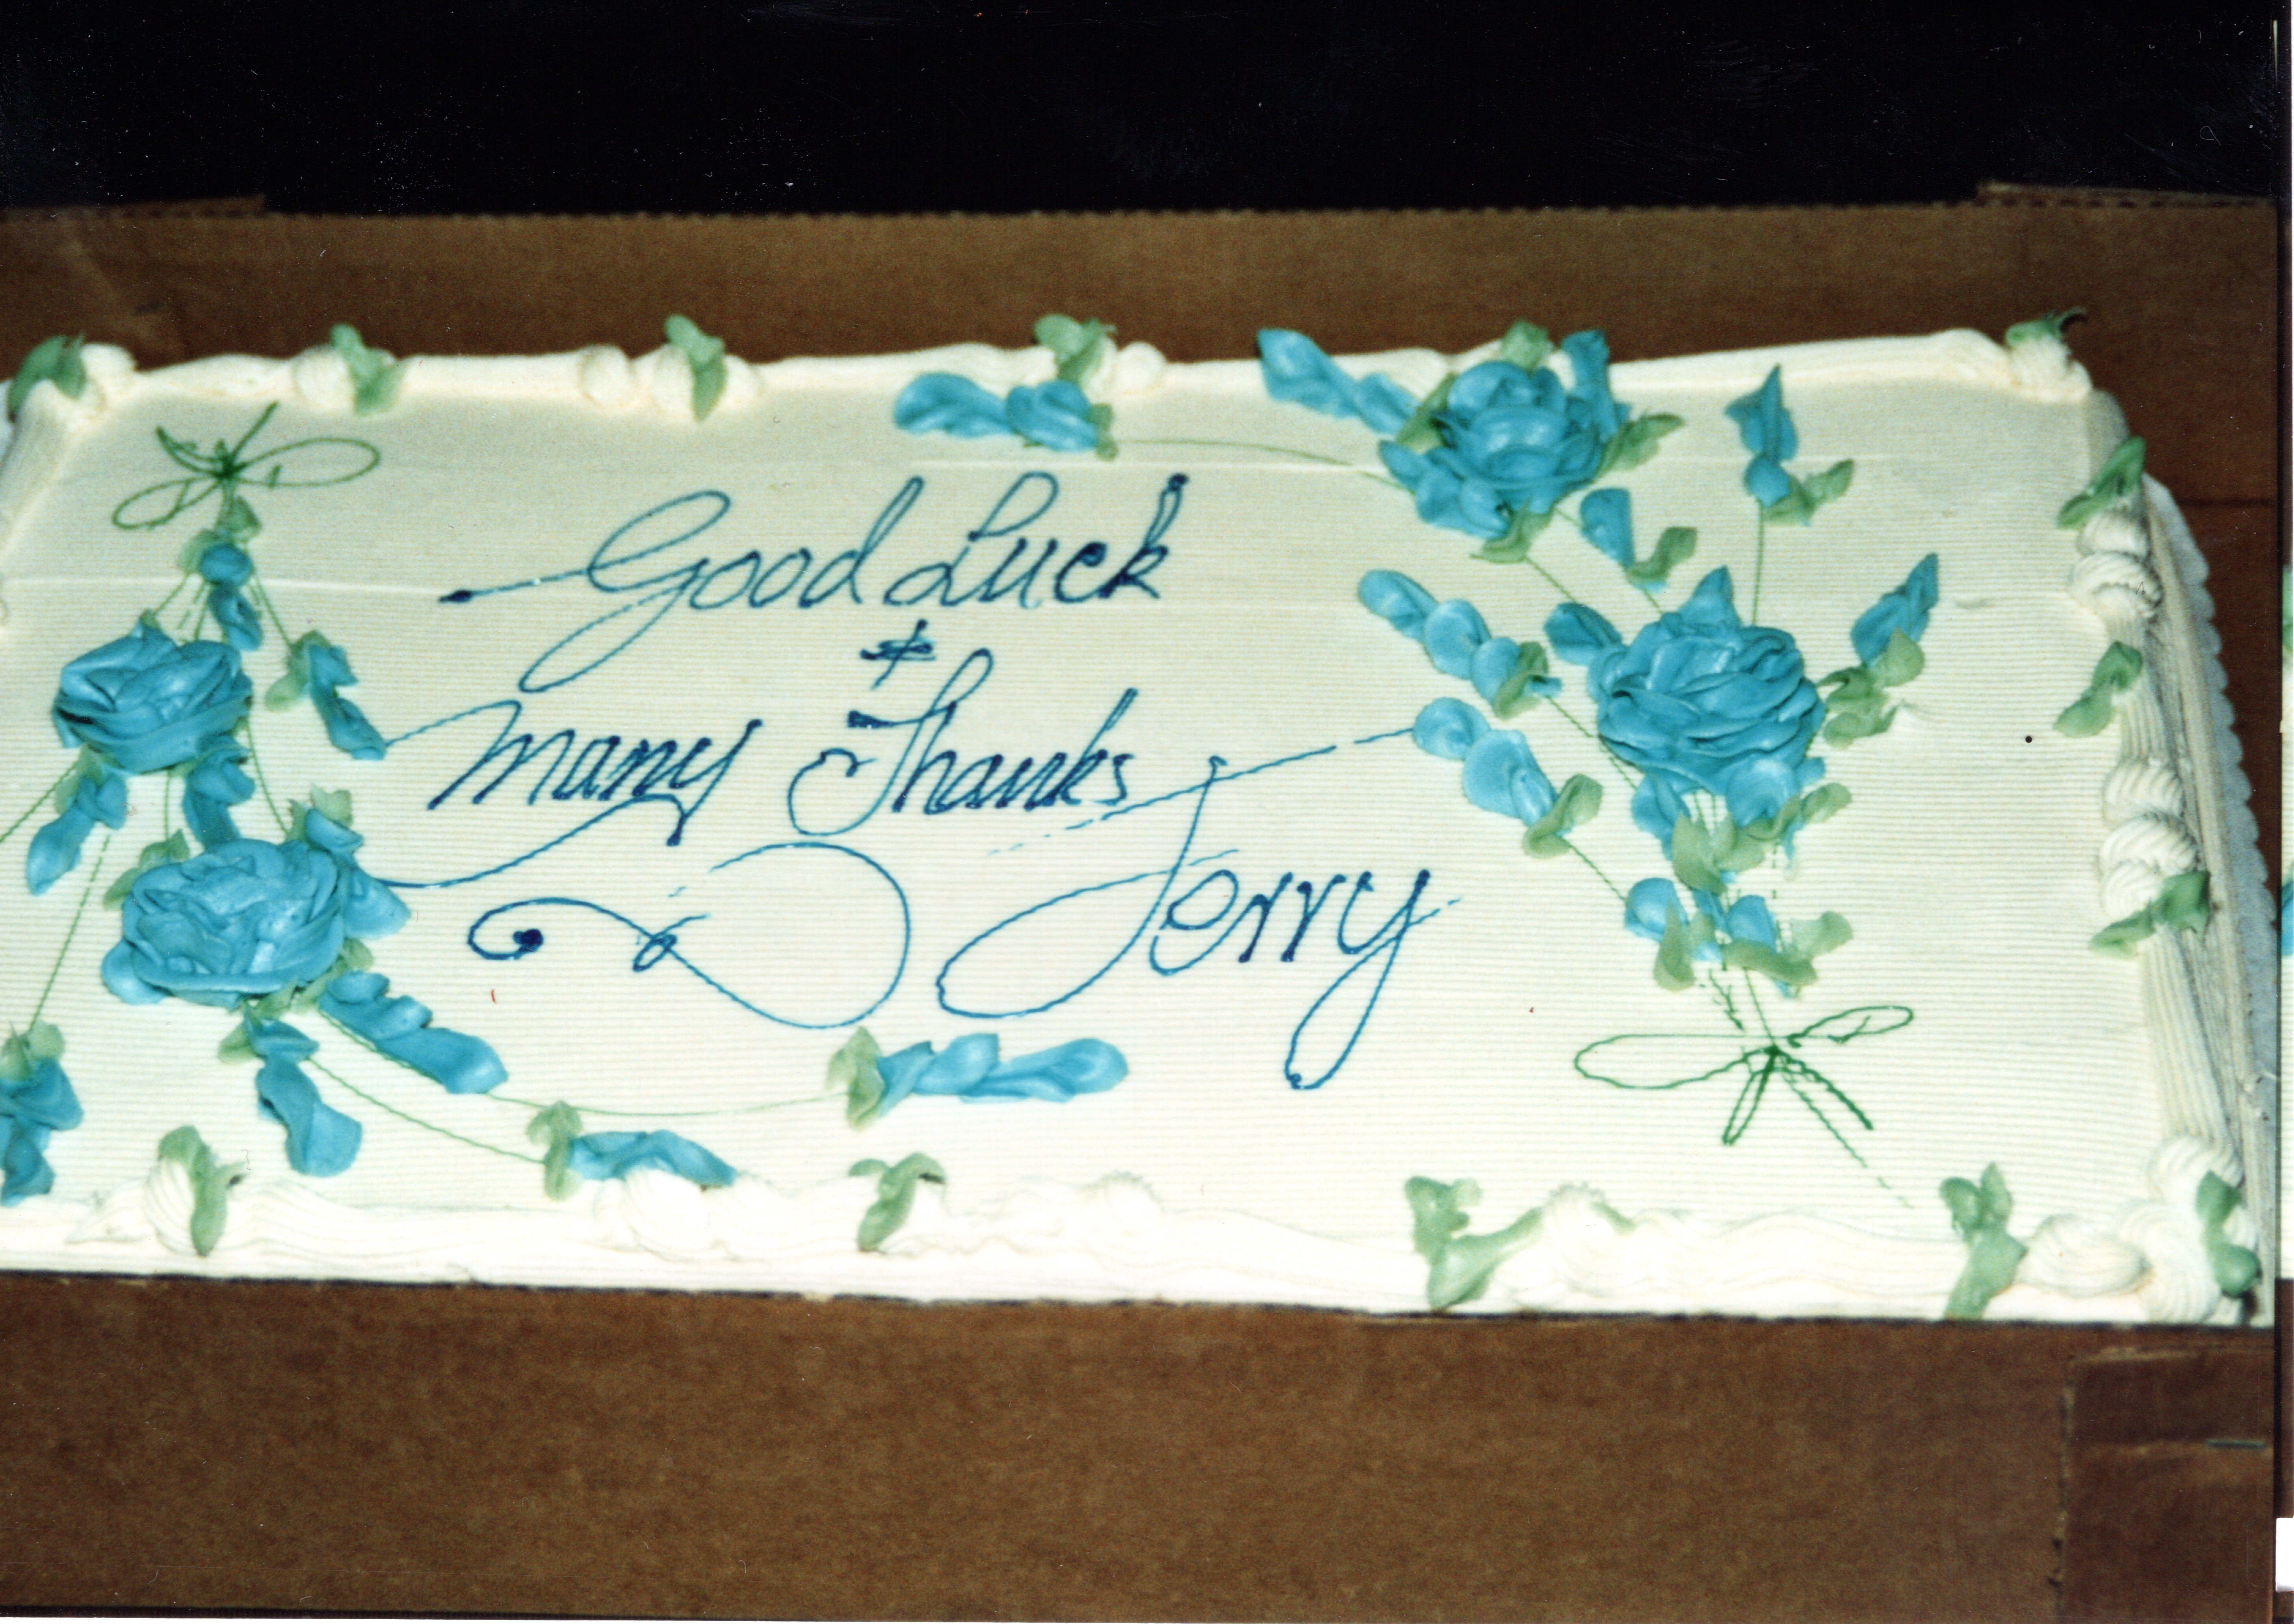 1990 Broadcast Administrator - Jerry Donnelly Leaves - Cake